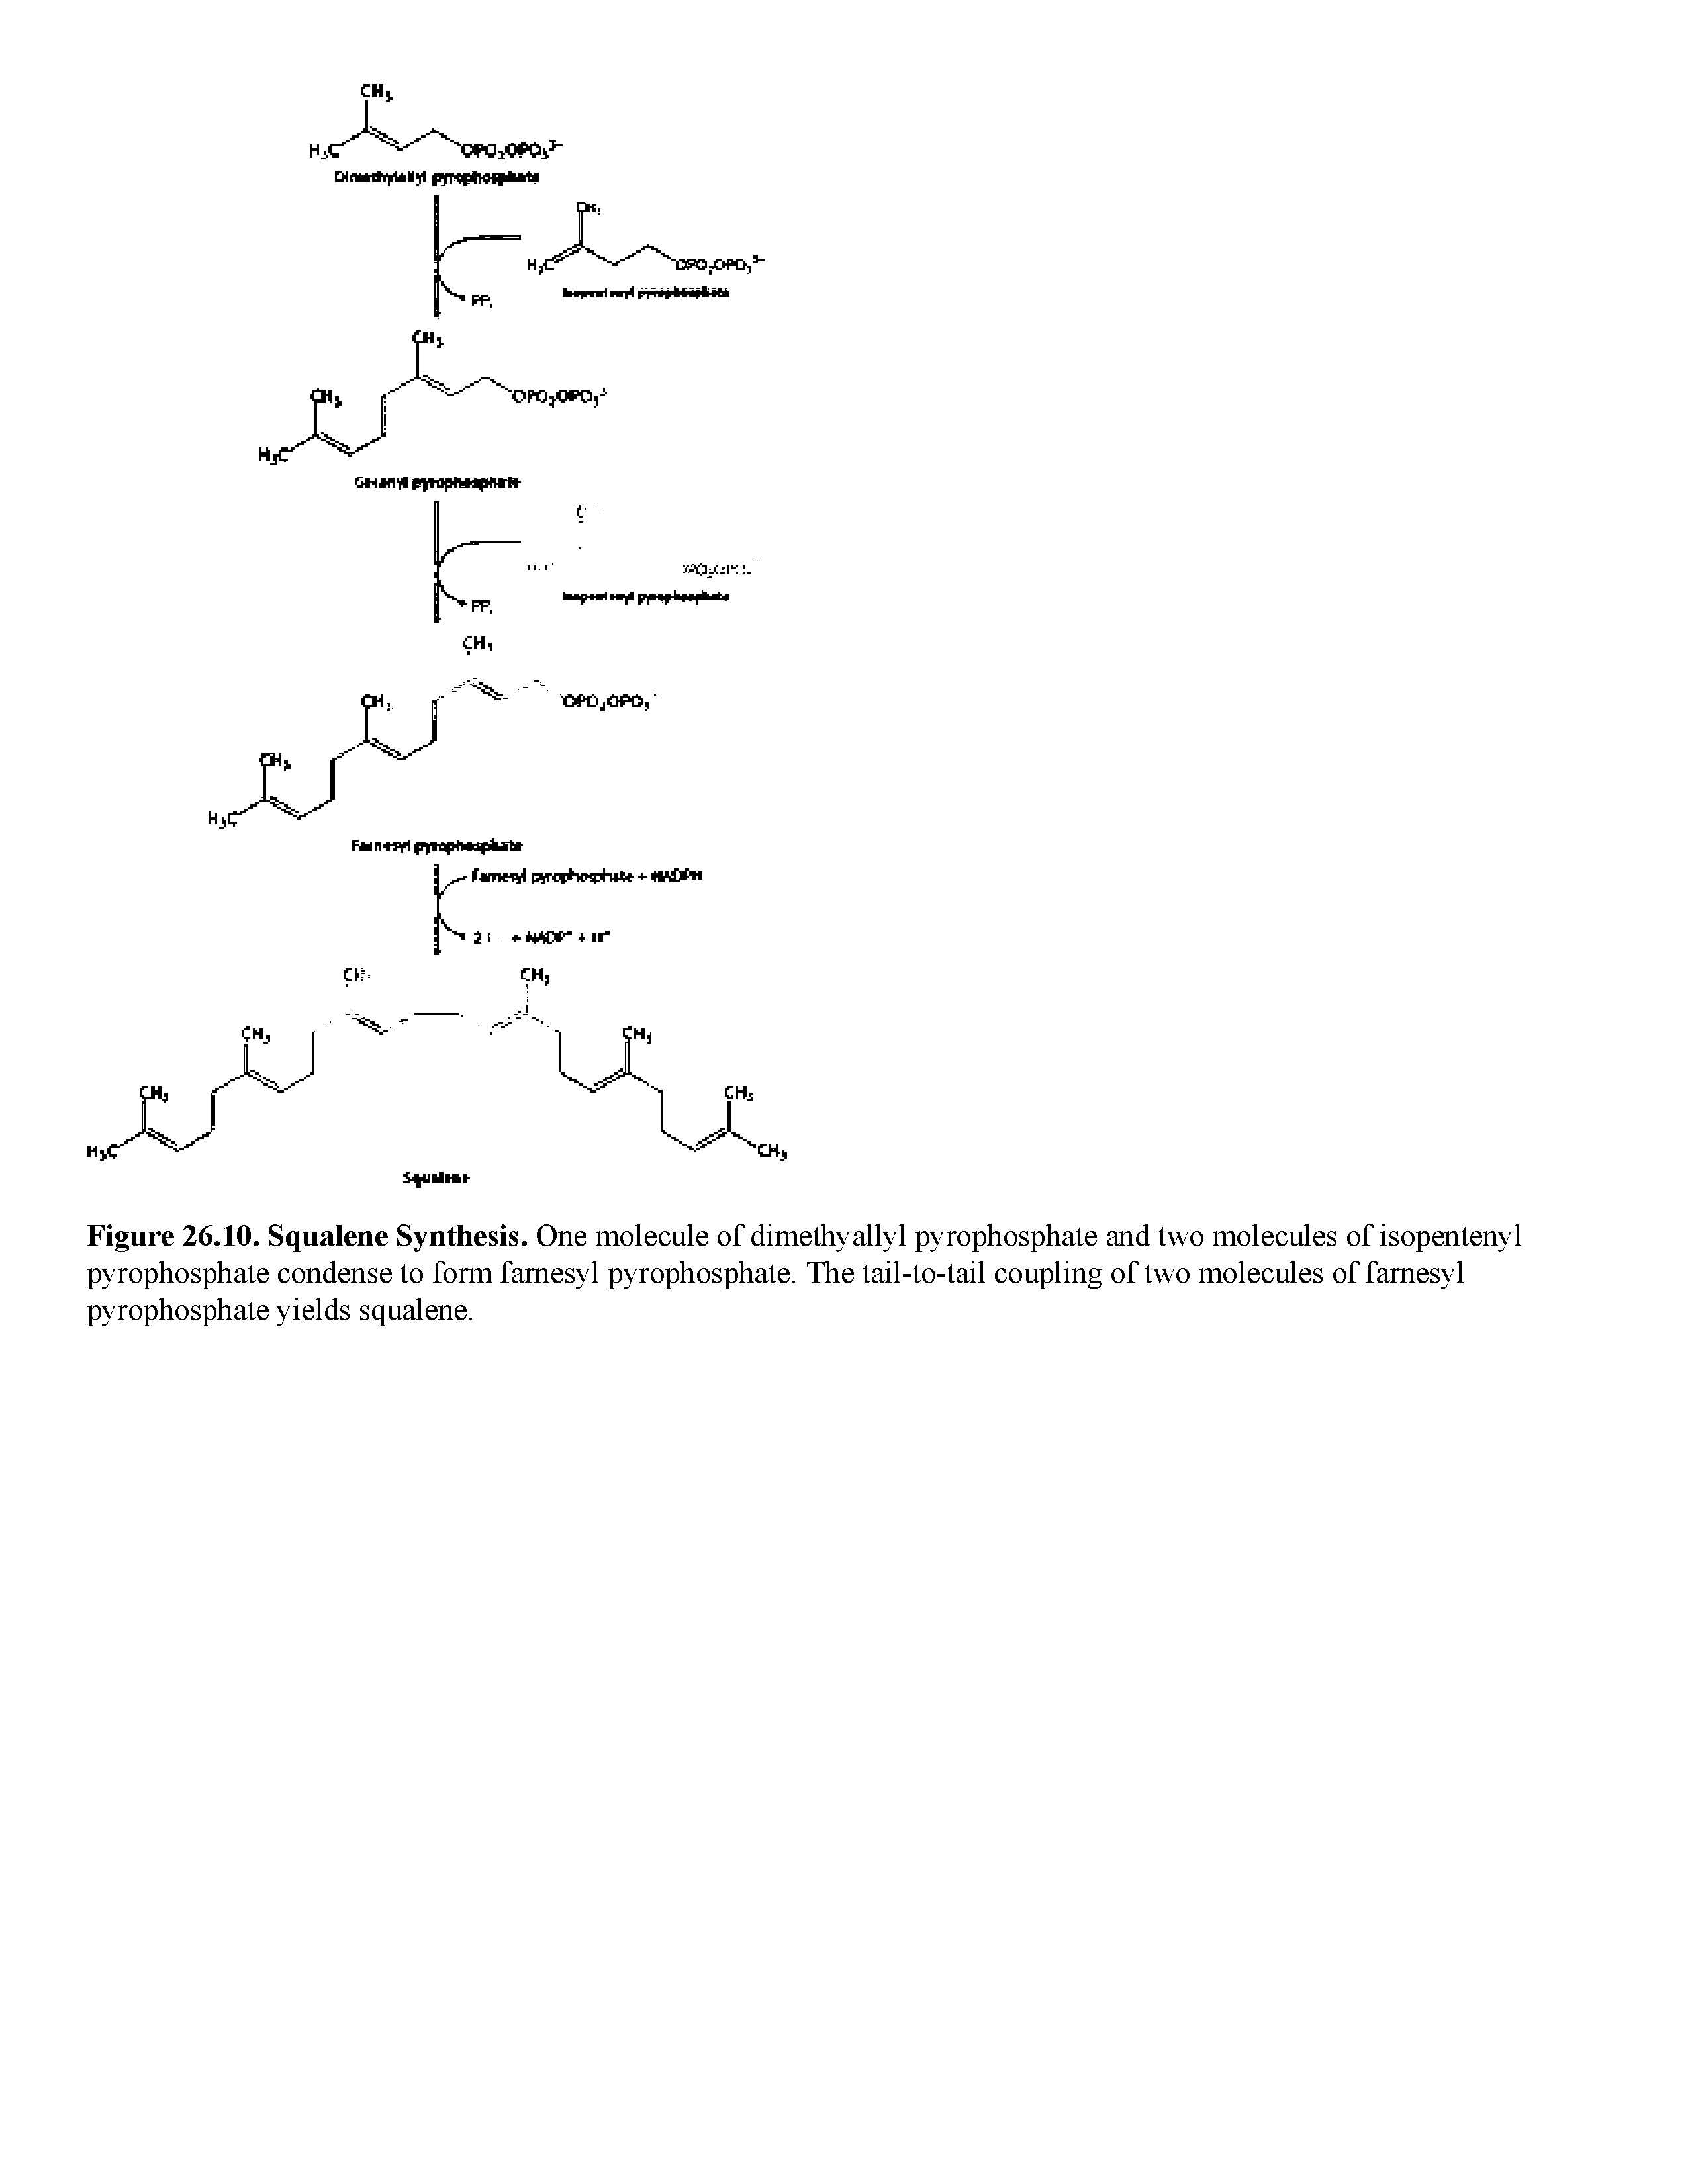 Figure 26.10. Squalene Synthesis. One molecule of dimethyallyl pyrophosphate and two molecules of isopentenyl pyrophosphate condense to form famesyl pyrophosphate. The tail-to-tail coupling of two molecules of famesyl pyrophosphate yields squalene.